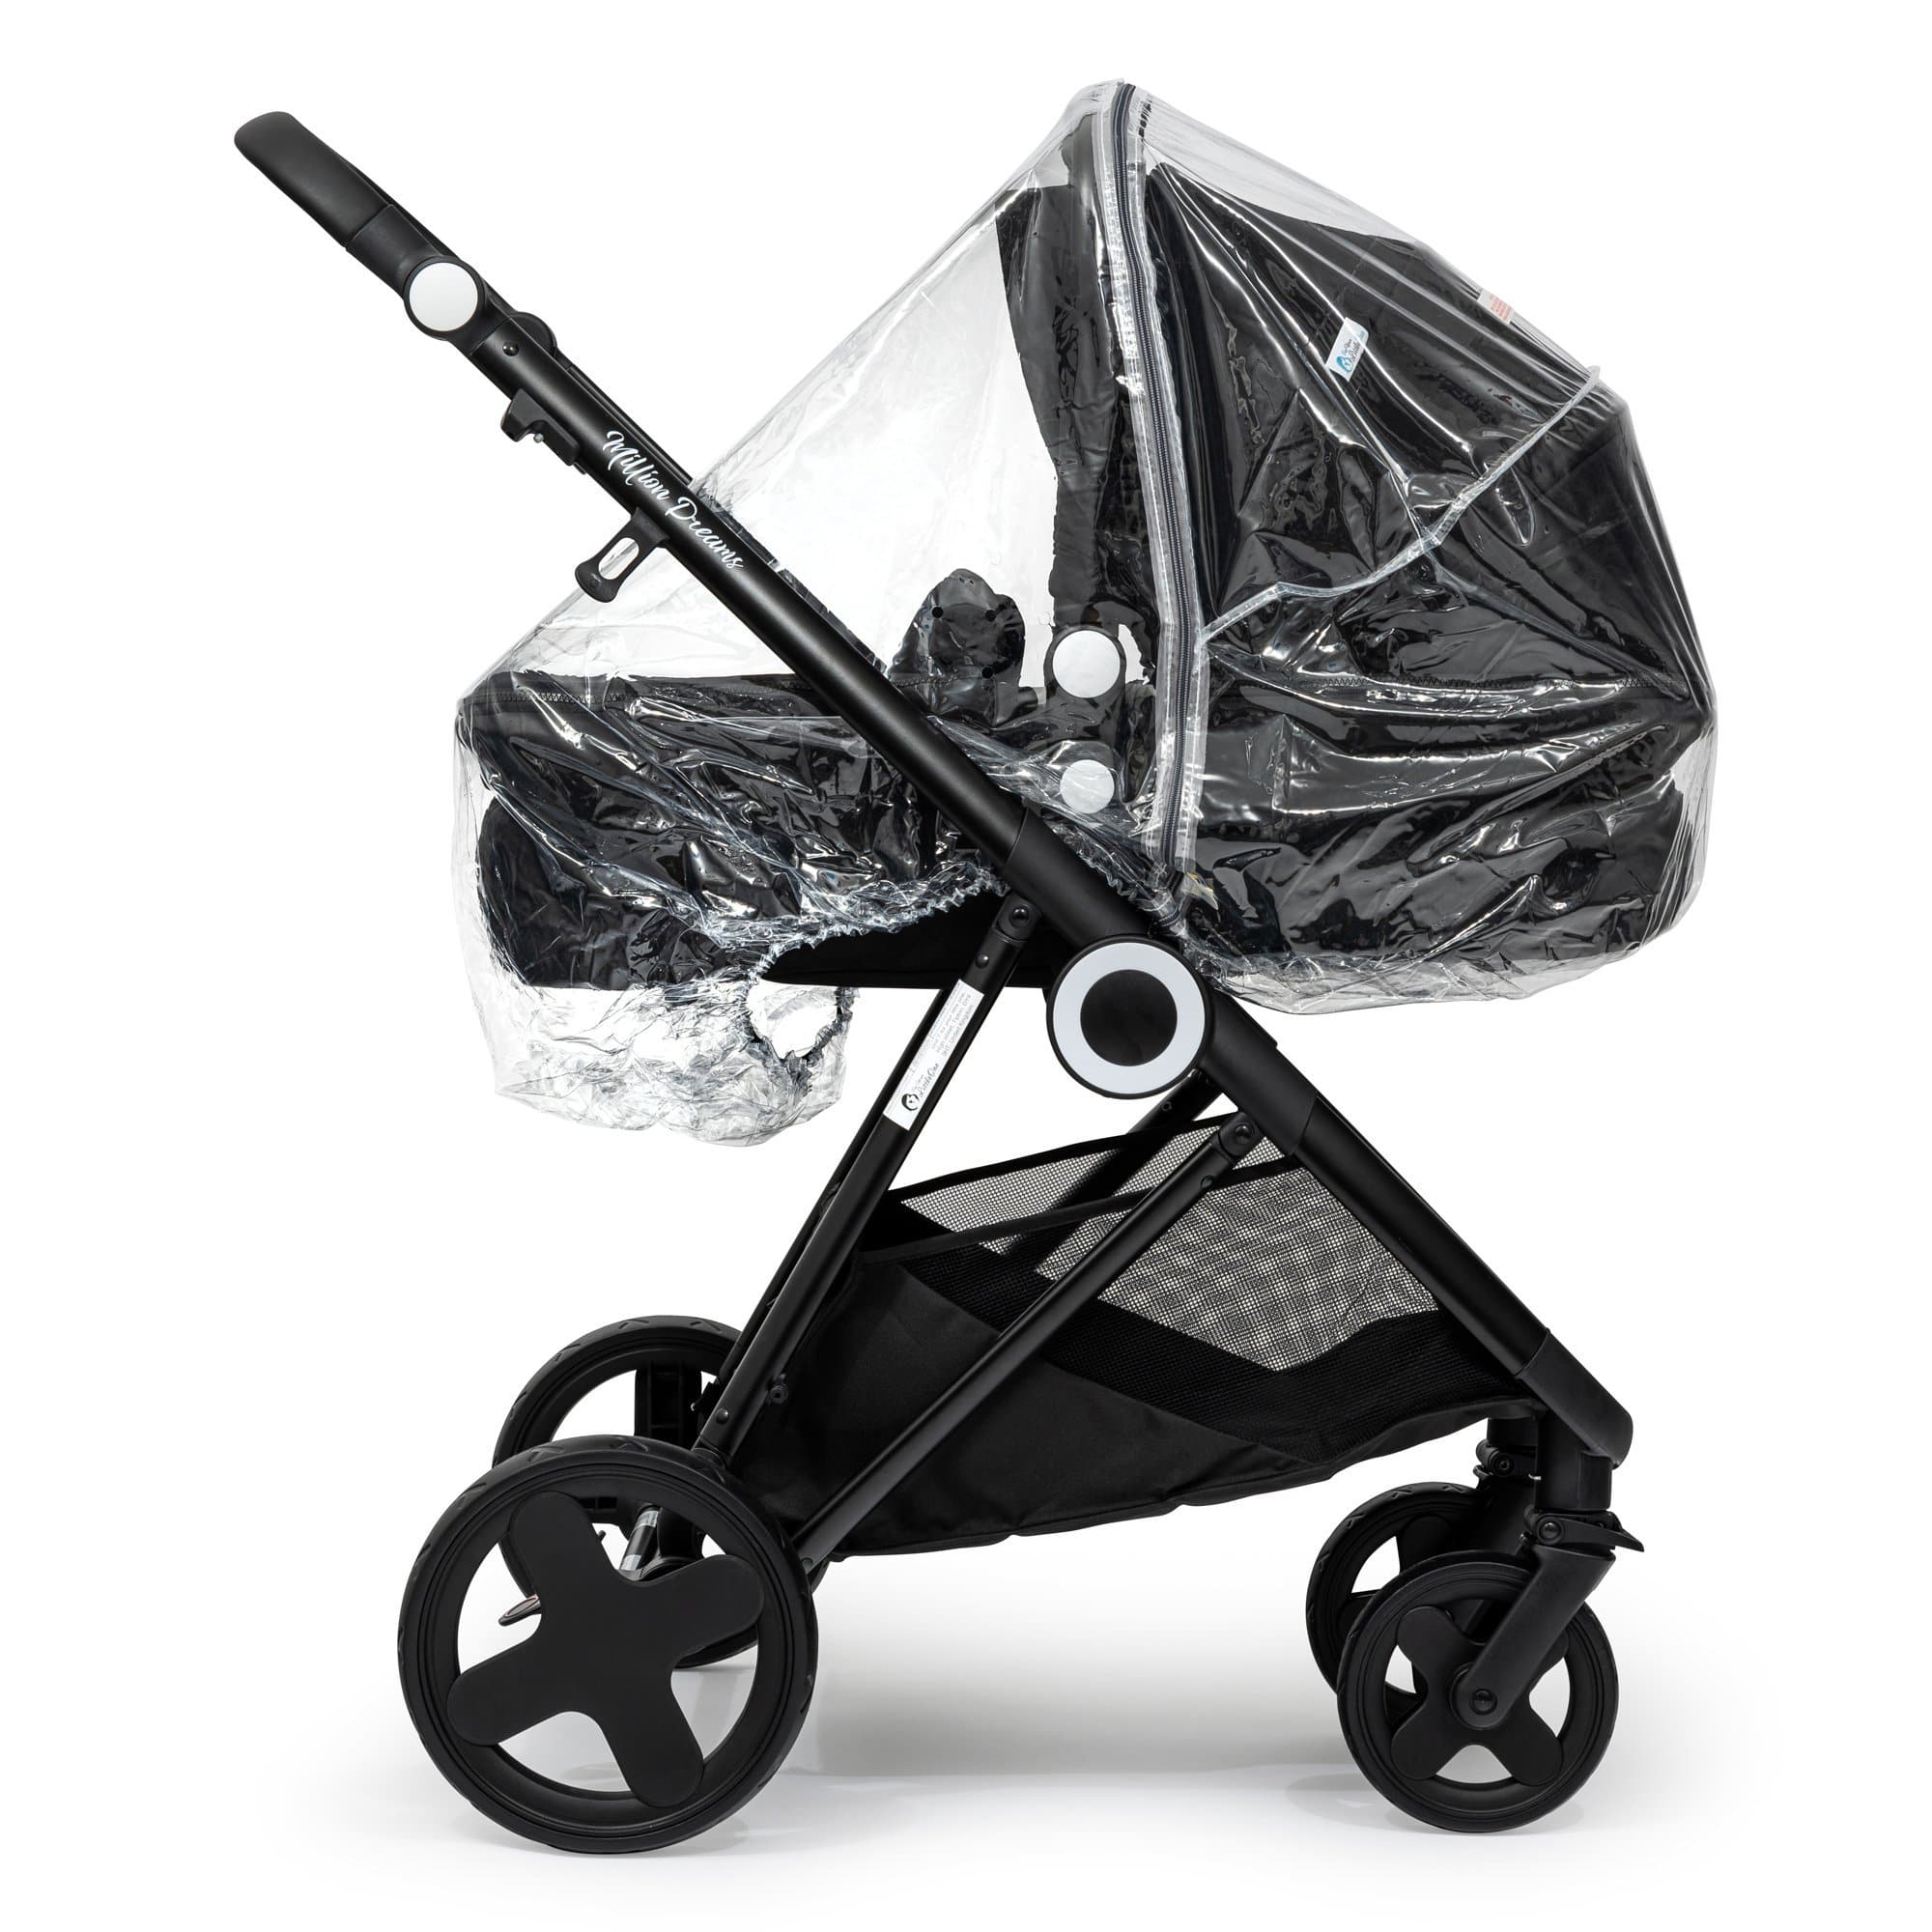 2 in 1 Rain Cover Compatible with Norton - Fits All Models - For Your Little One